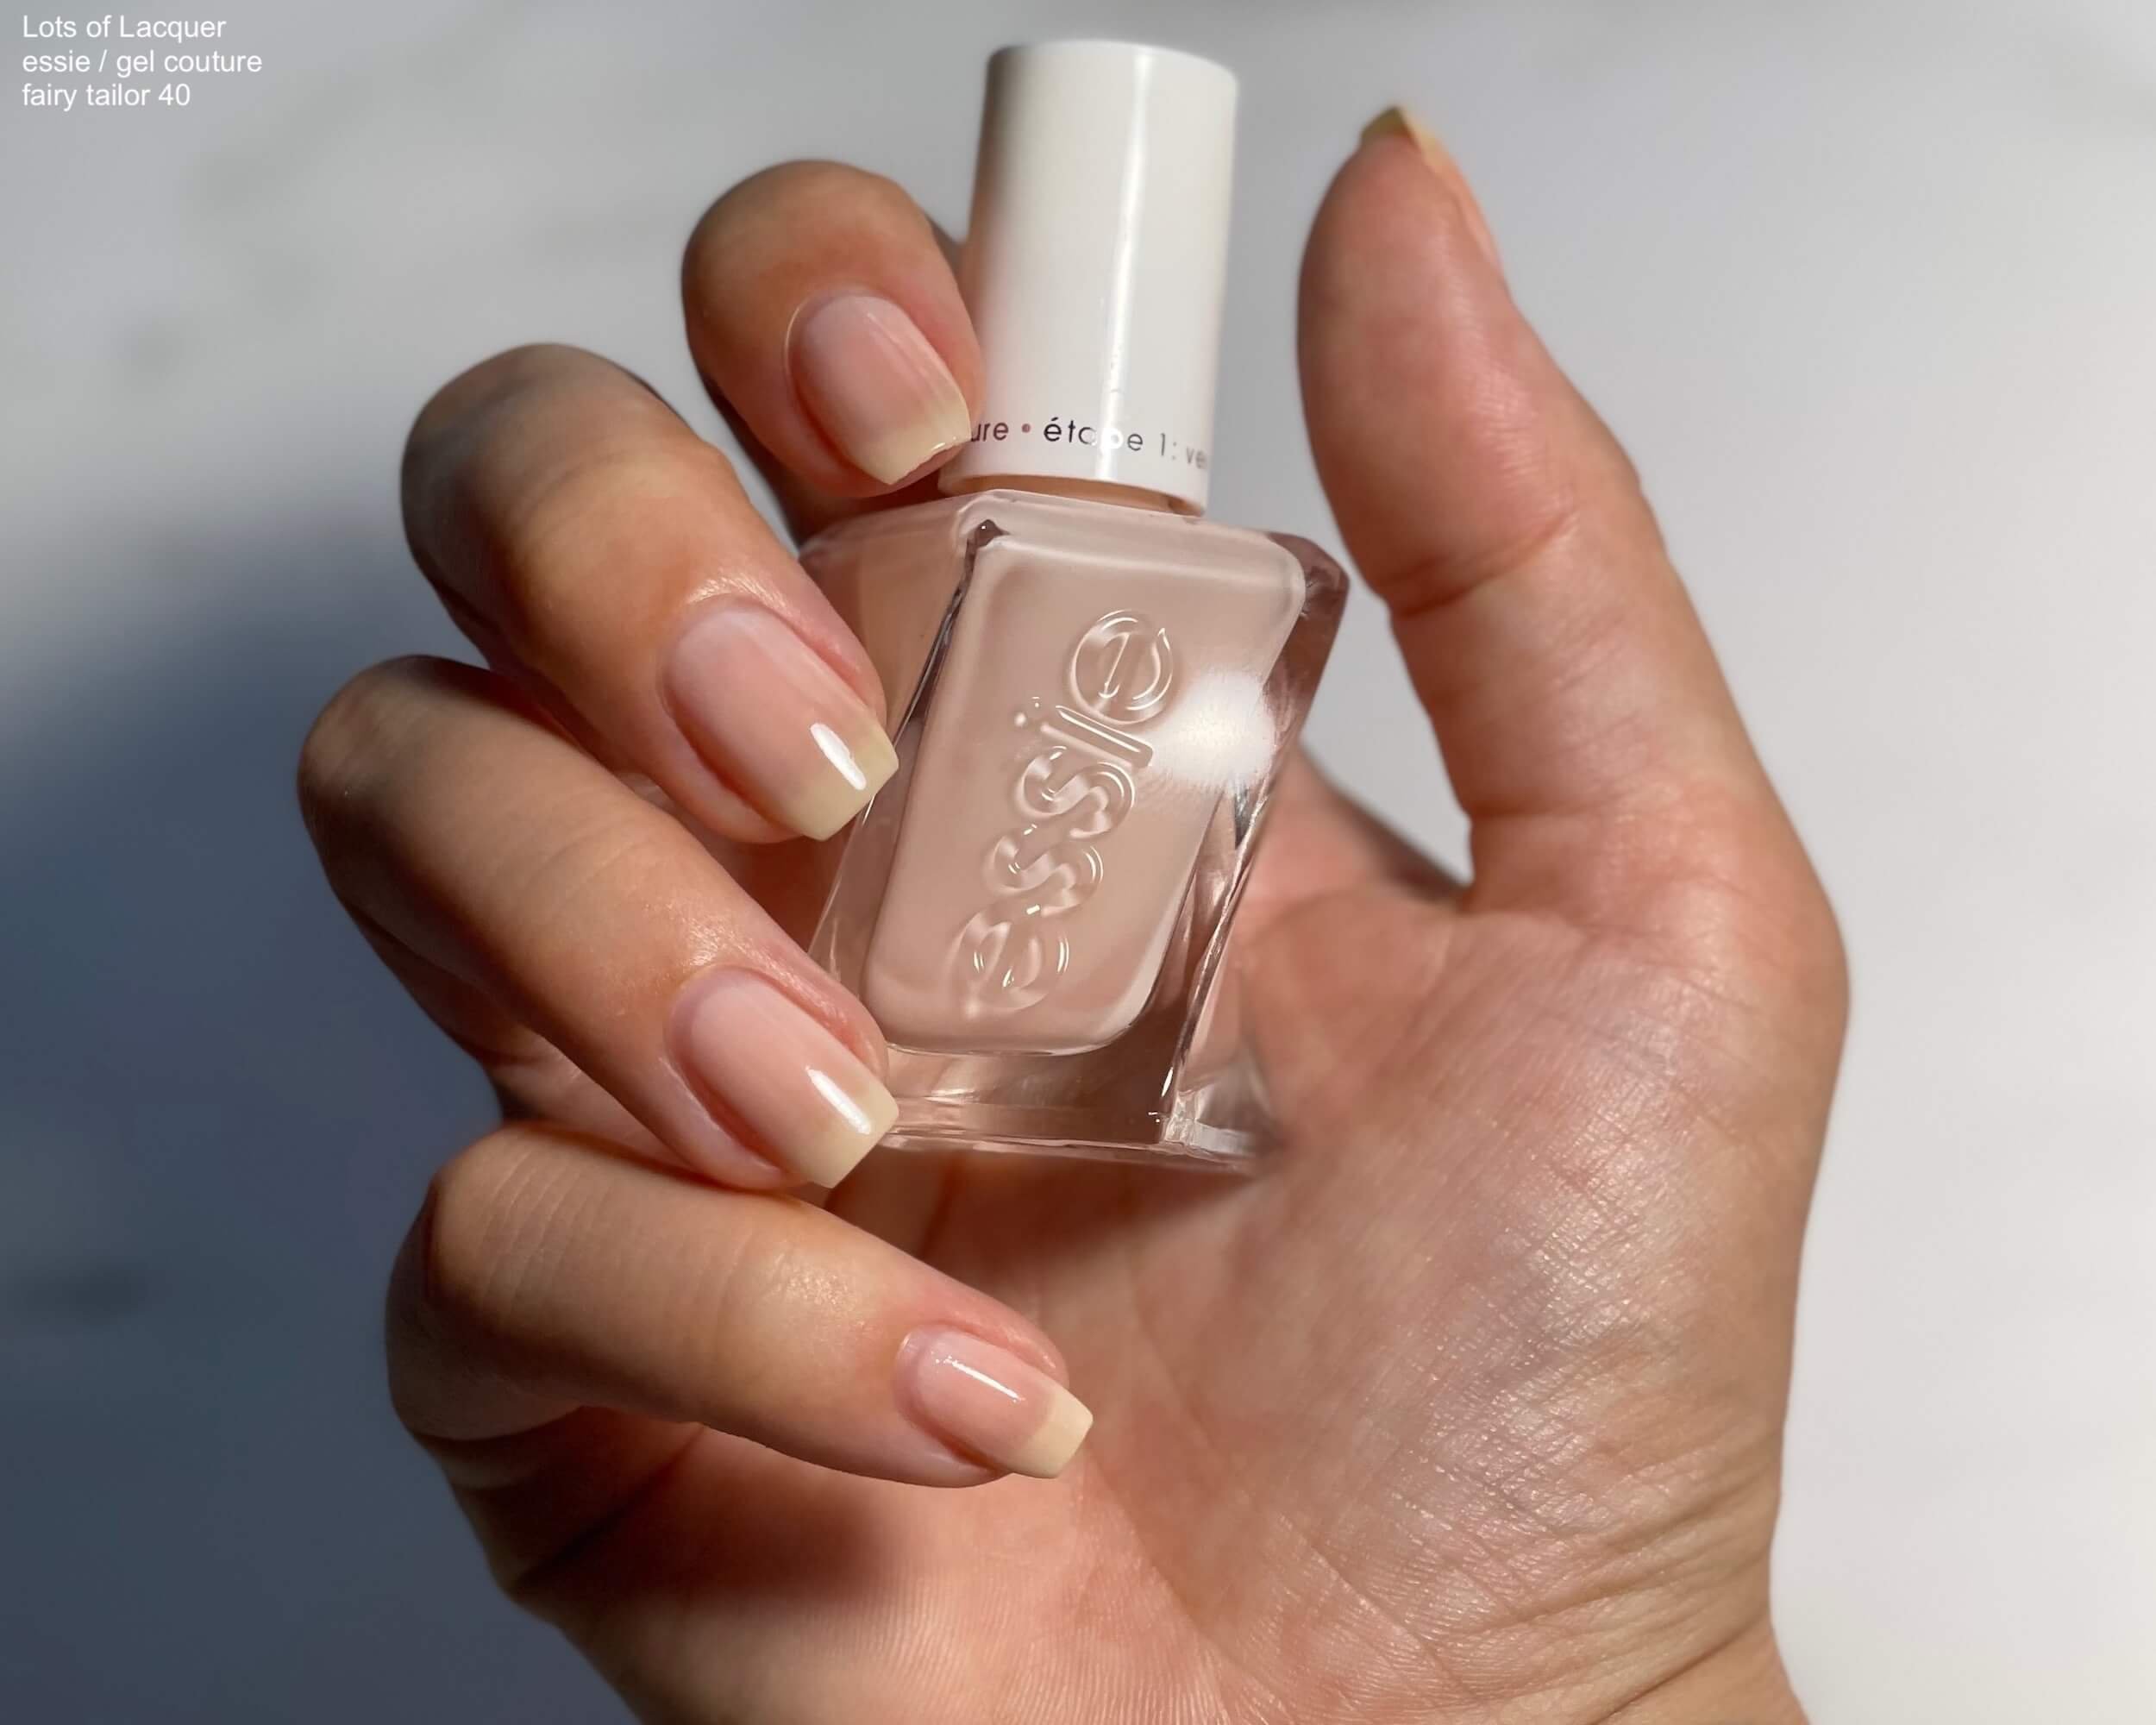 2. Essie Gel Couture in "Fairy Tailor" - wide 4